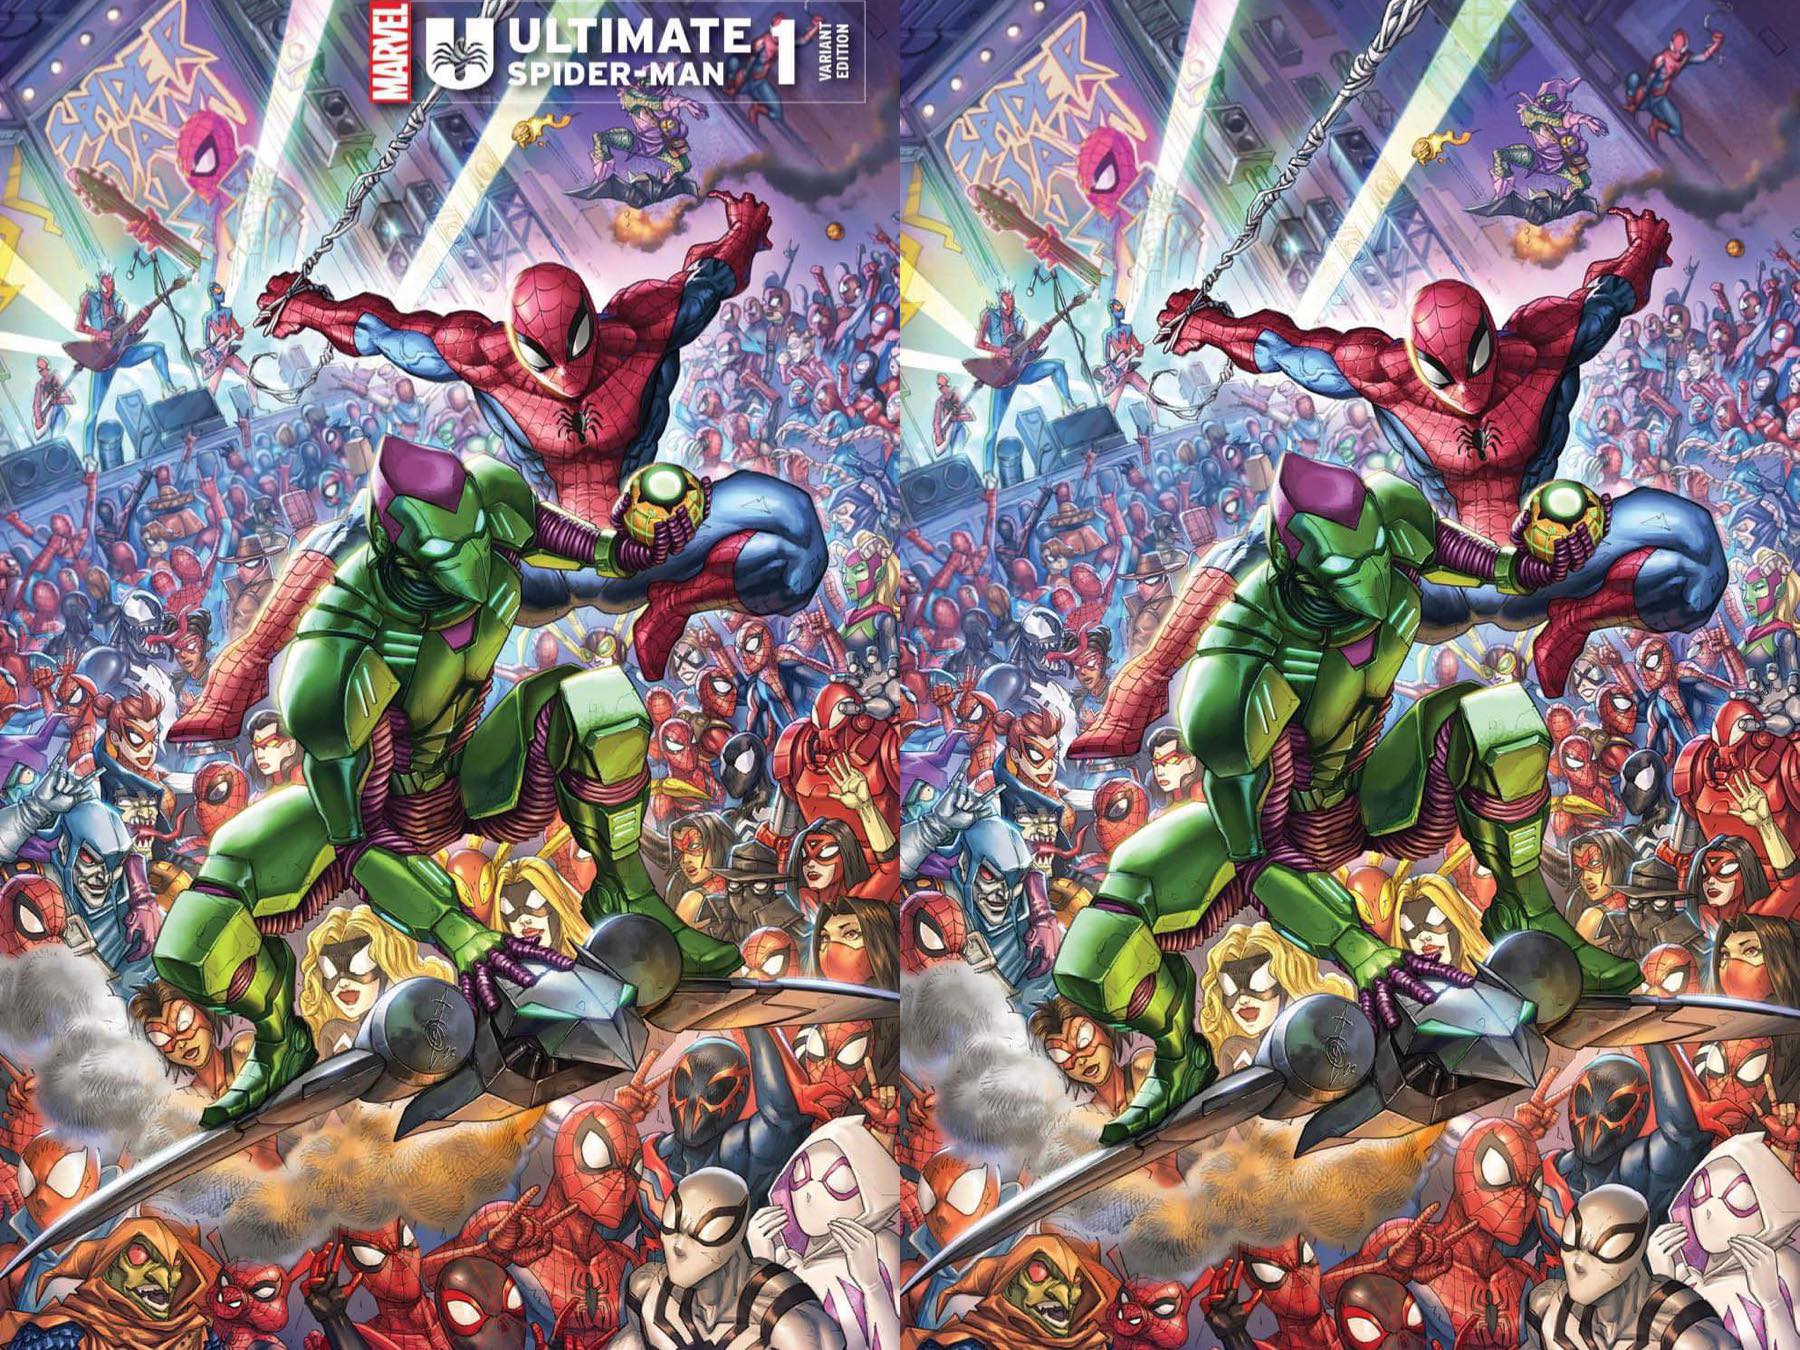 ULTIMATE SPIDER-MAN 1 ALAN QUAH EXCLUSIVE VARIANT COVERS- 01/10/24